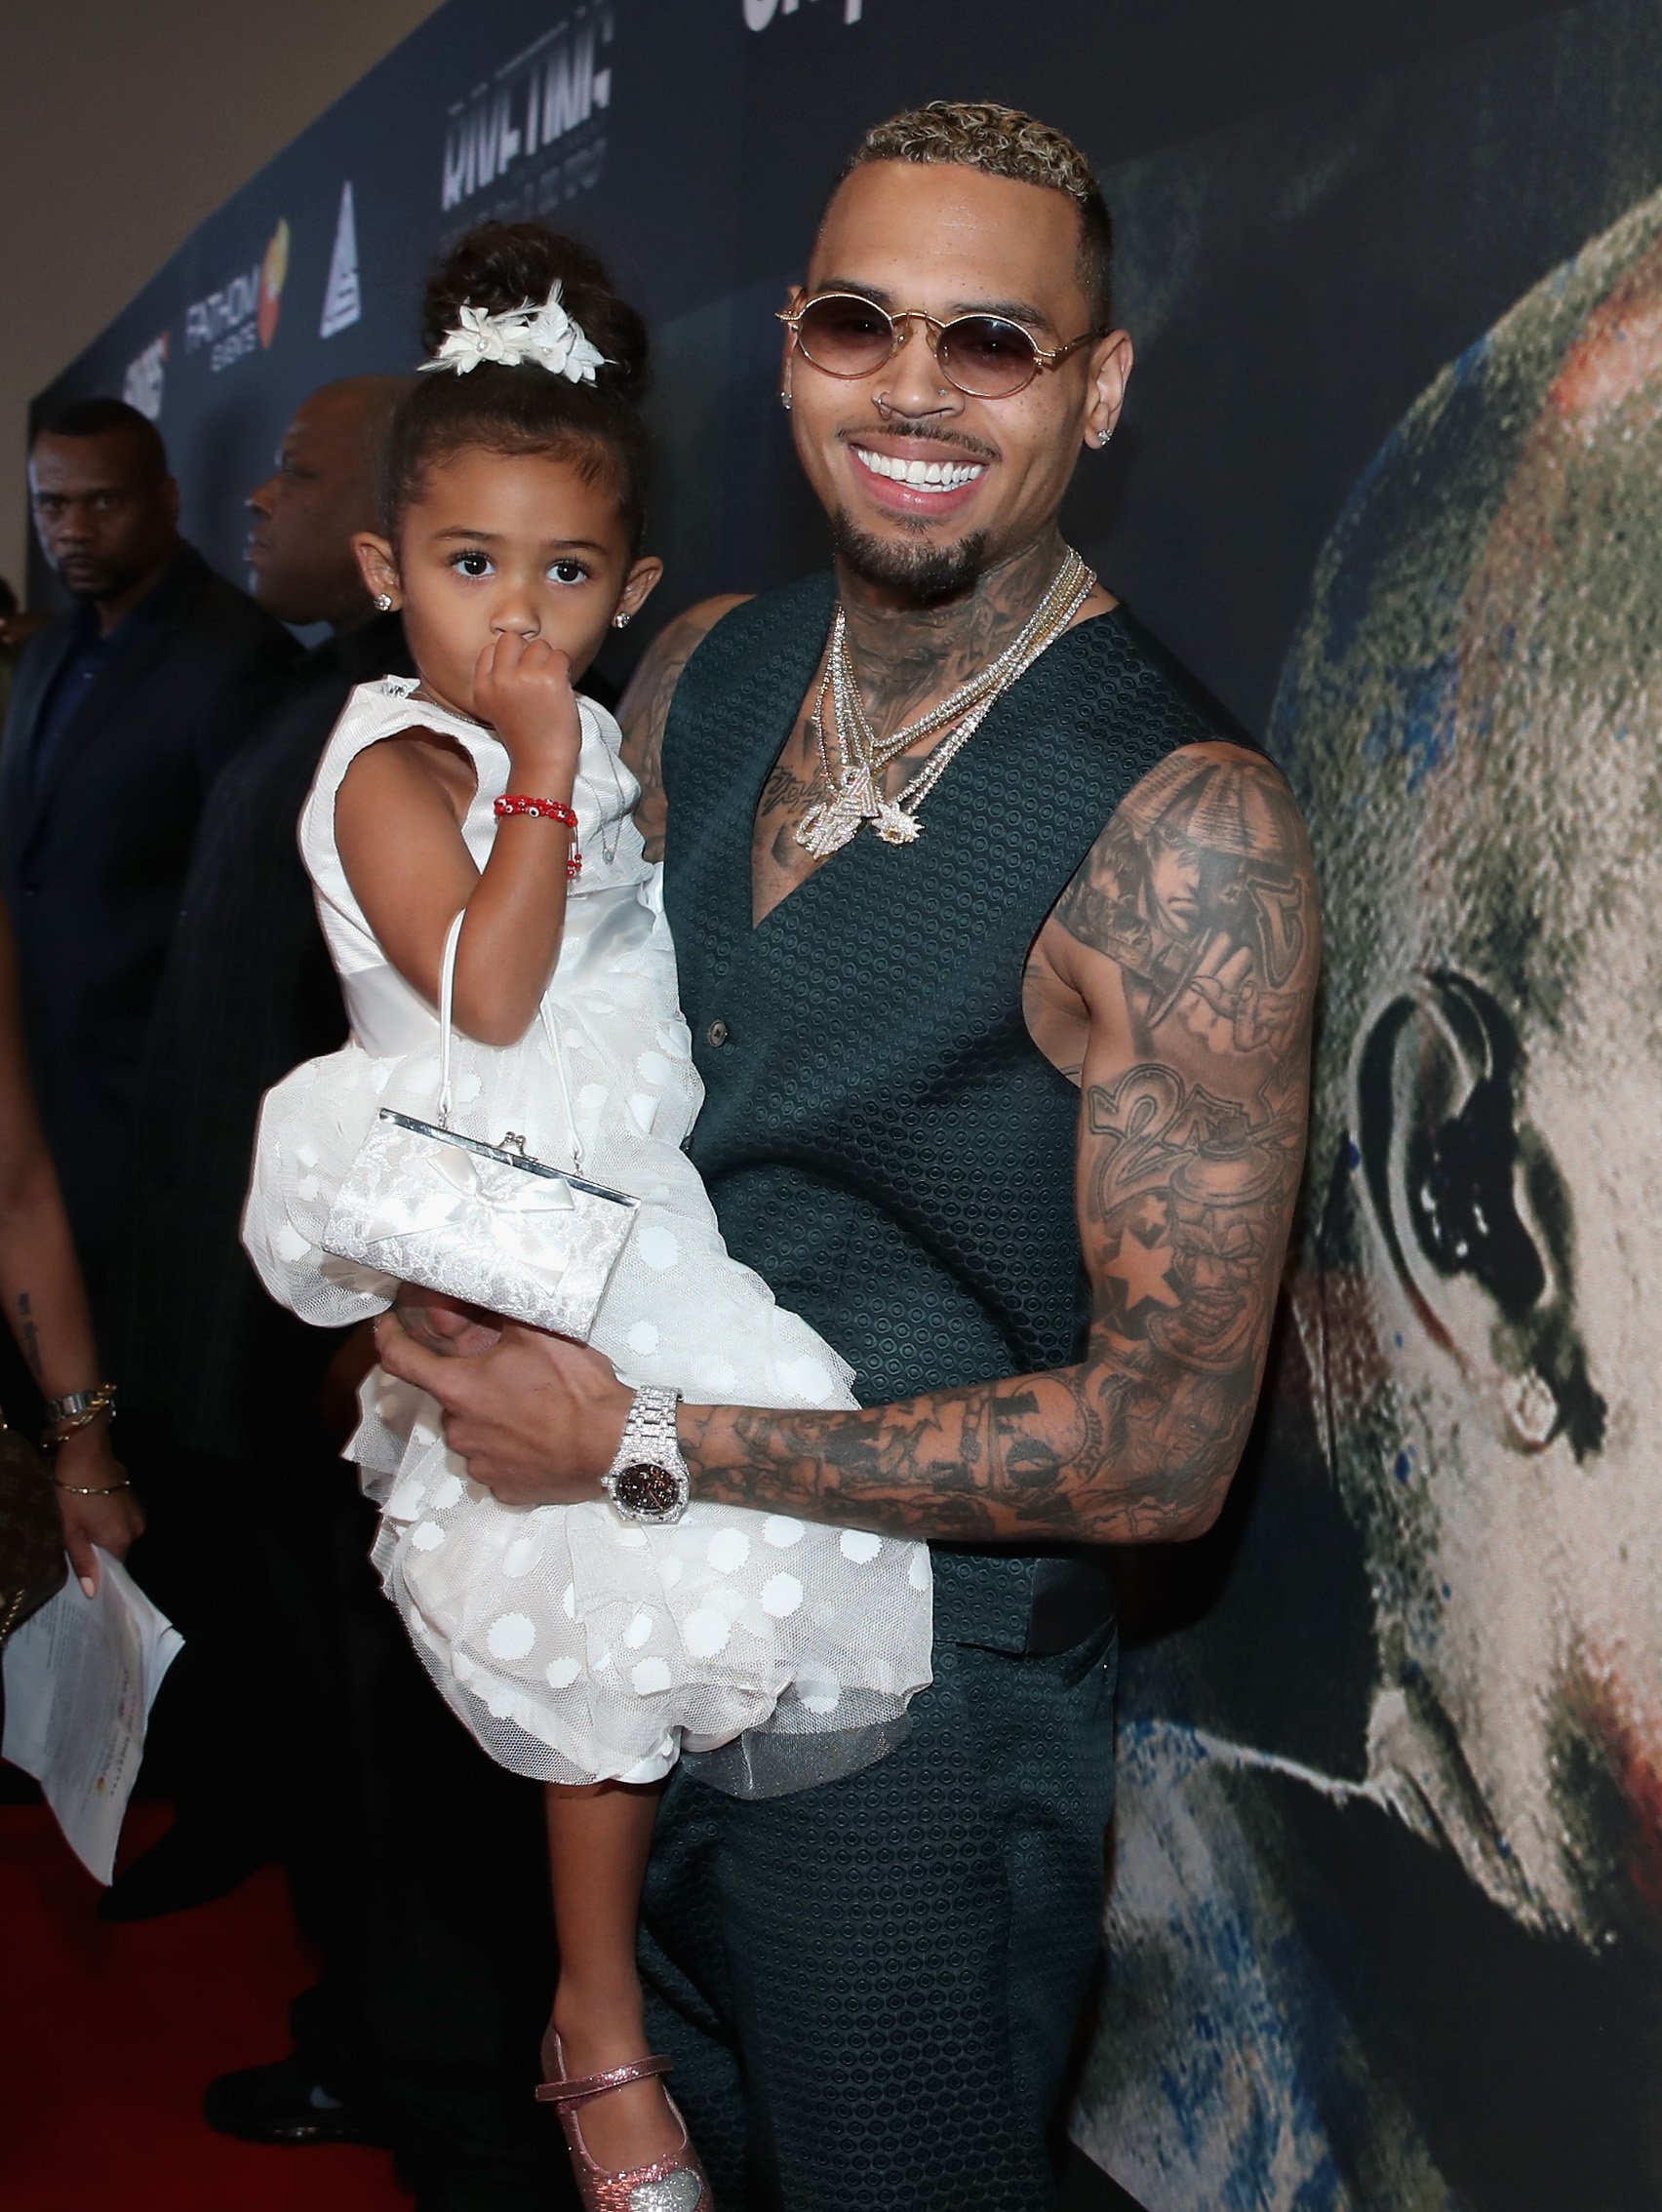 Chris Brown and his daughter Royalty at the premiere of "Chris Brown: Welcome To My Life" on June 6, 2017 | Photo: Getty Images